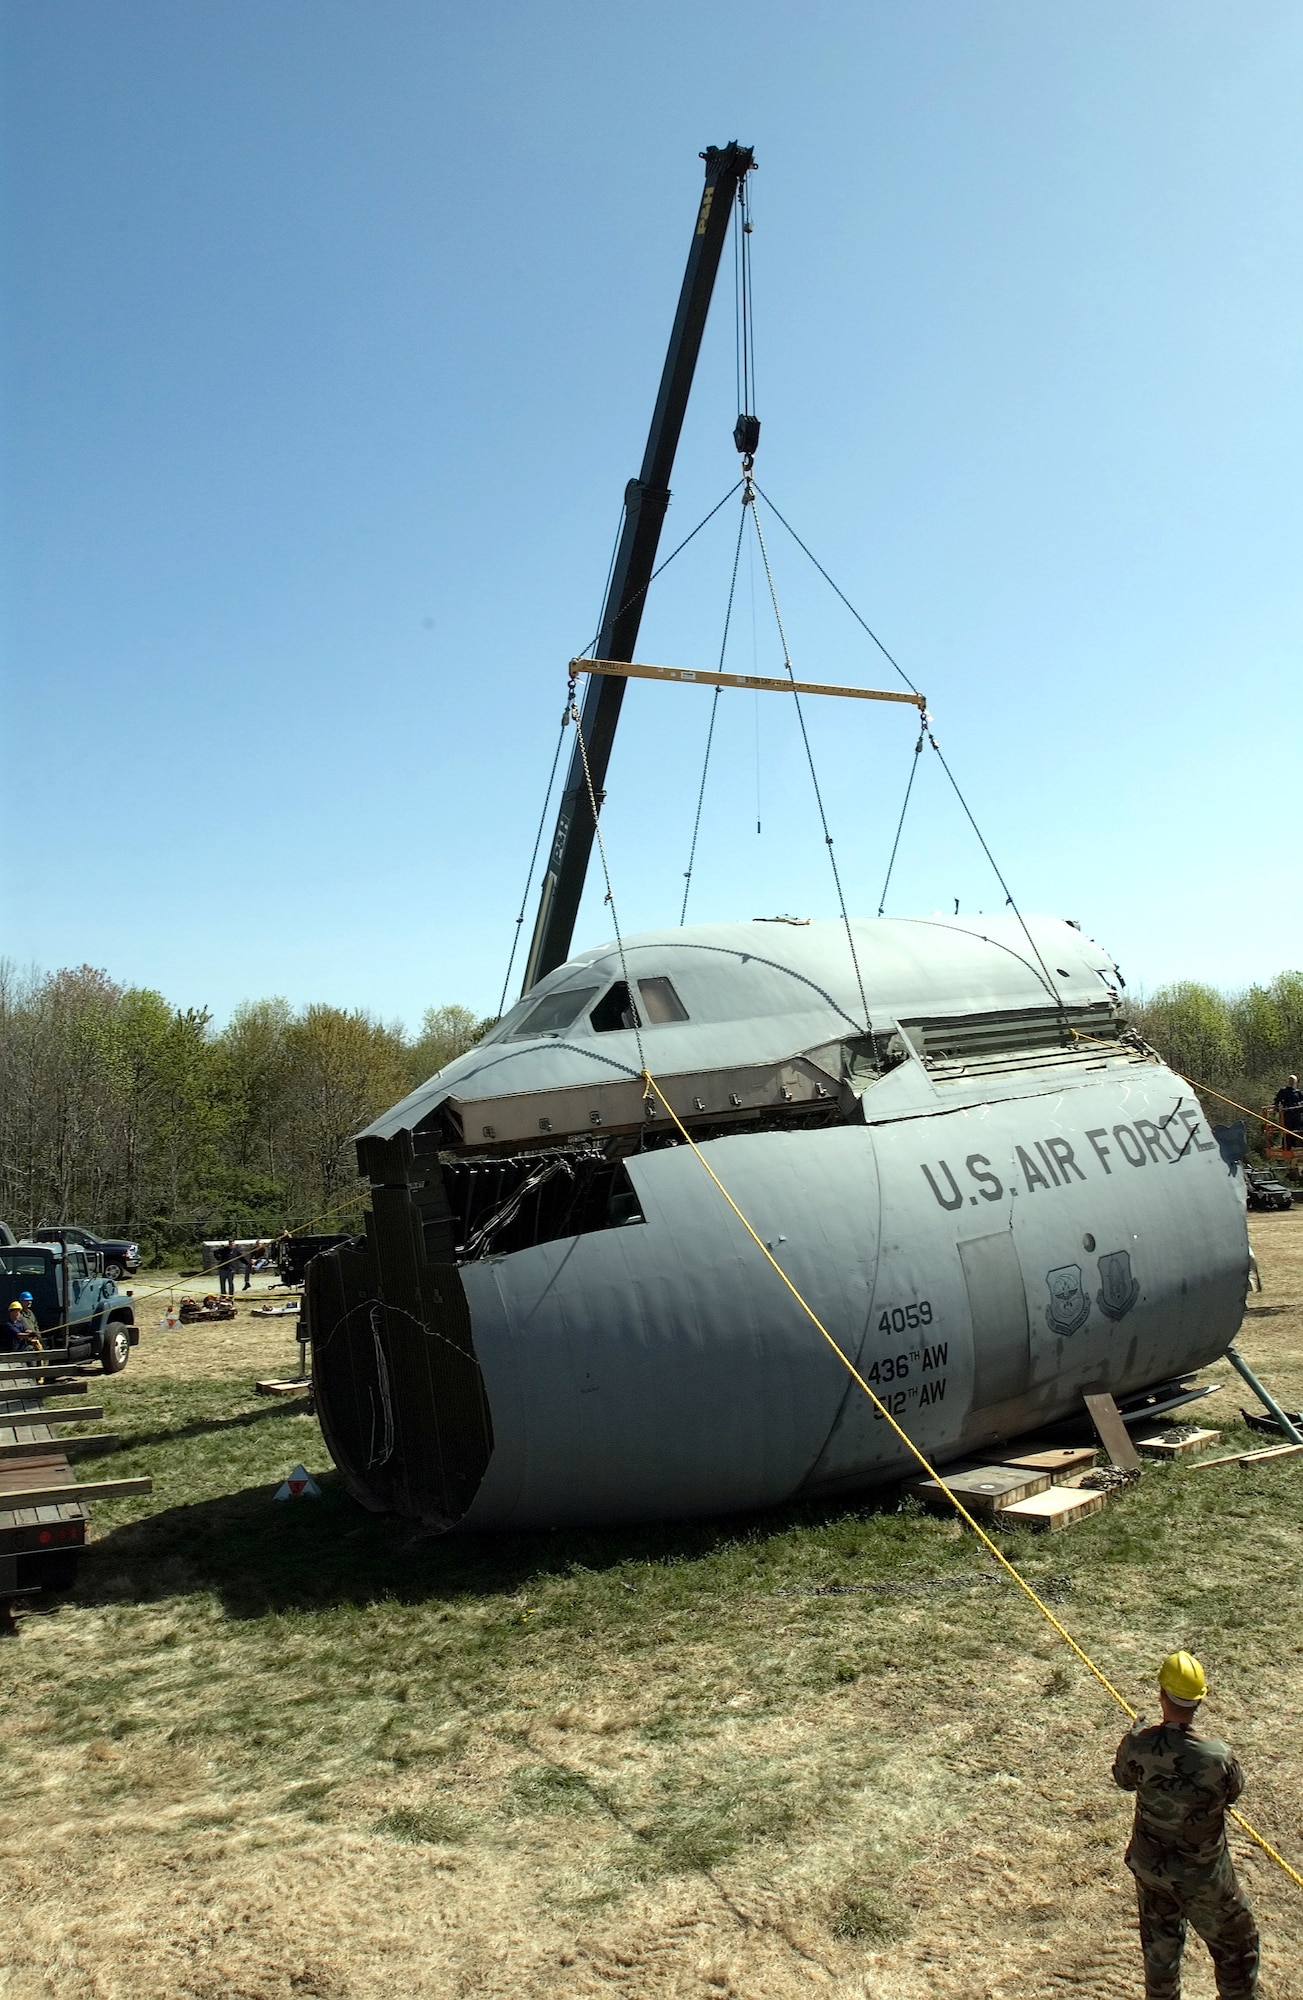 The crew compartment of the C-5 Galaxy that crashed at Dover Air Force Base, Del., April 3, is removed from the body of the aircraft by a crane on Thursday, April 20, 2006. The compartment, once it is released by the accident investigation board, is expected to be used as a training simulator. (U.S. Air Force photo/Jason Minto)
